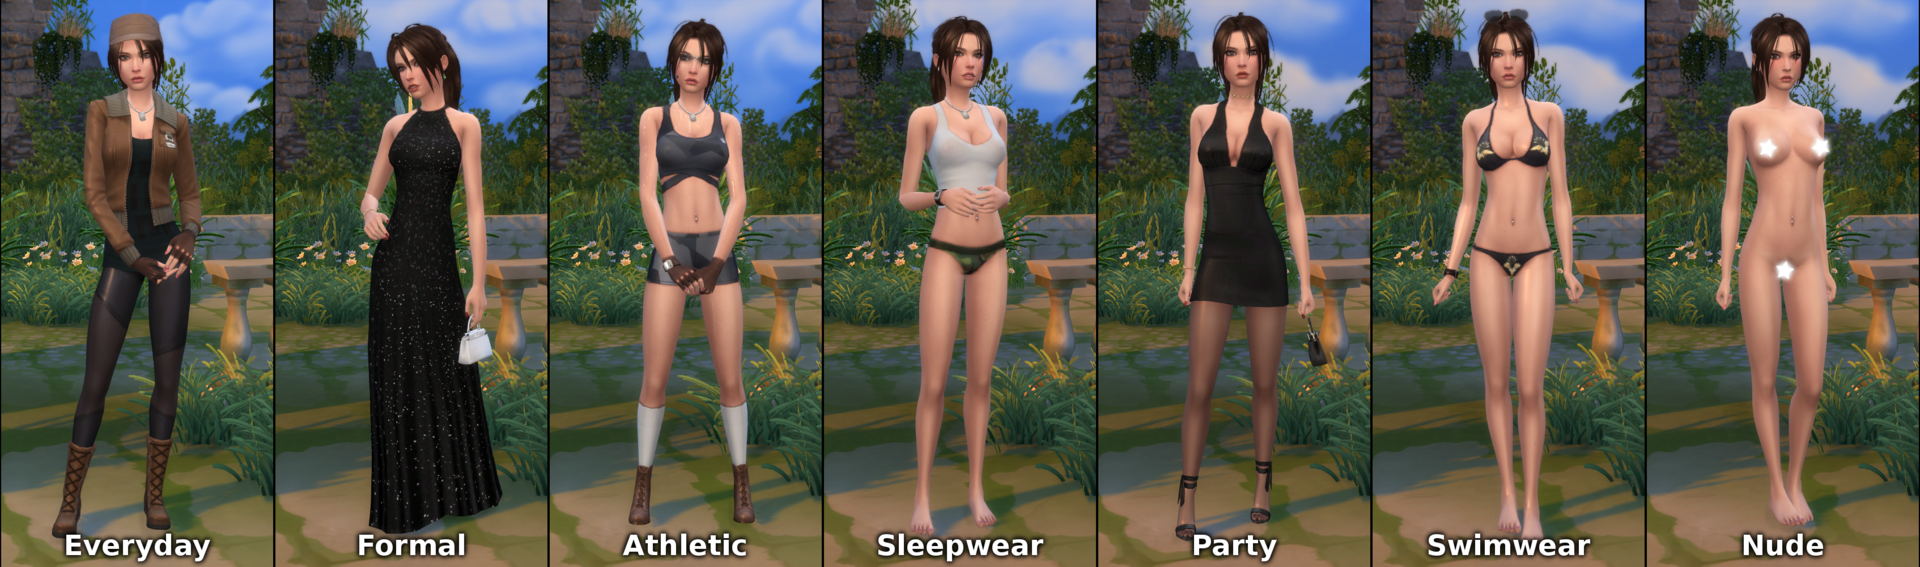 Sims 4 Erplederps Hot Sims Sexy Sims For Your Whims 170719 